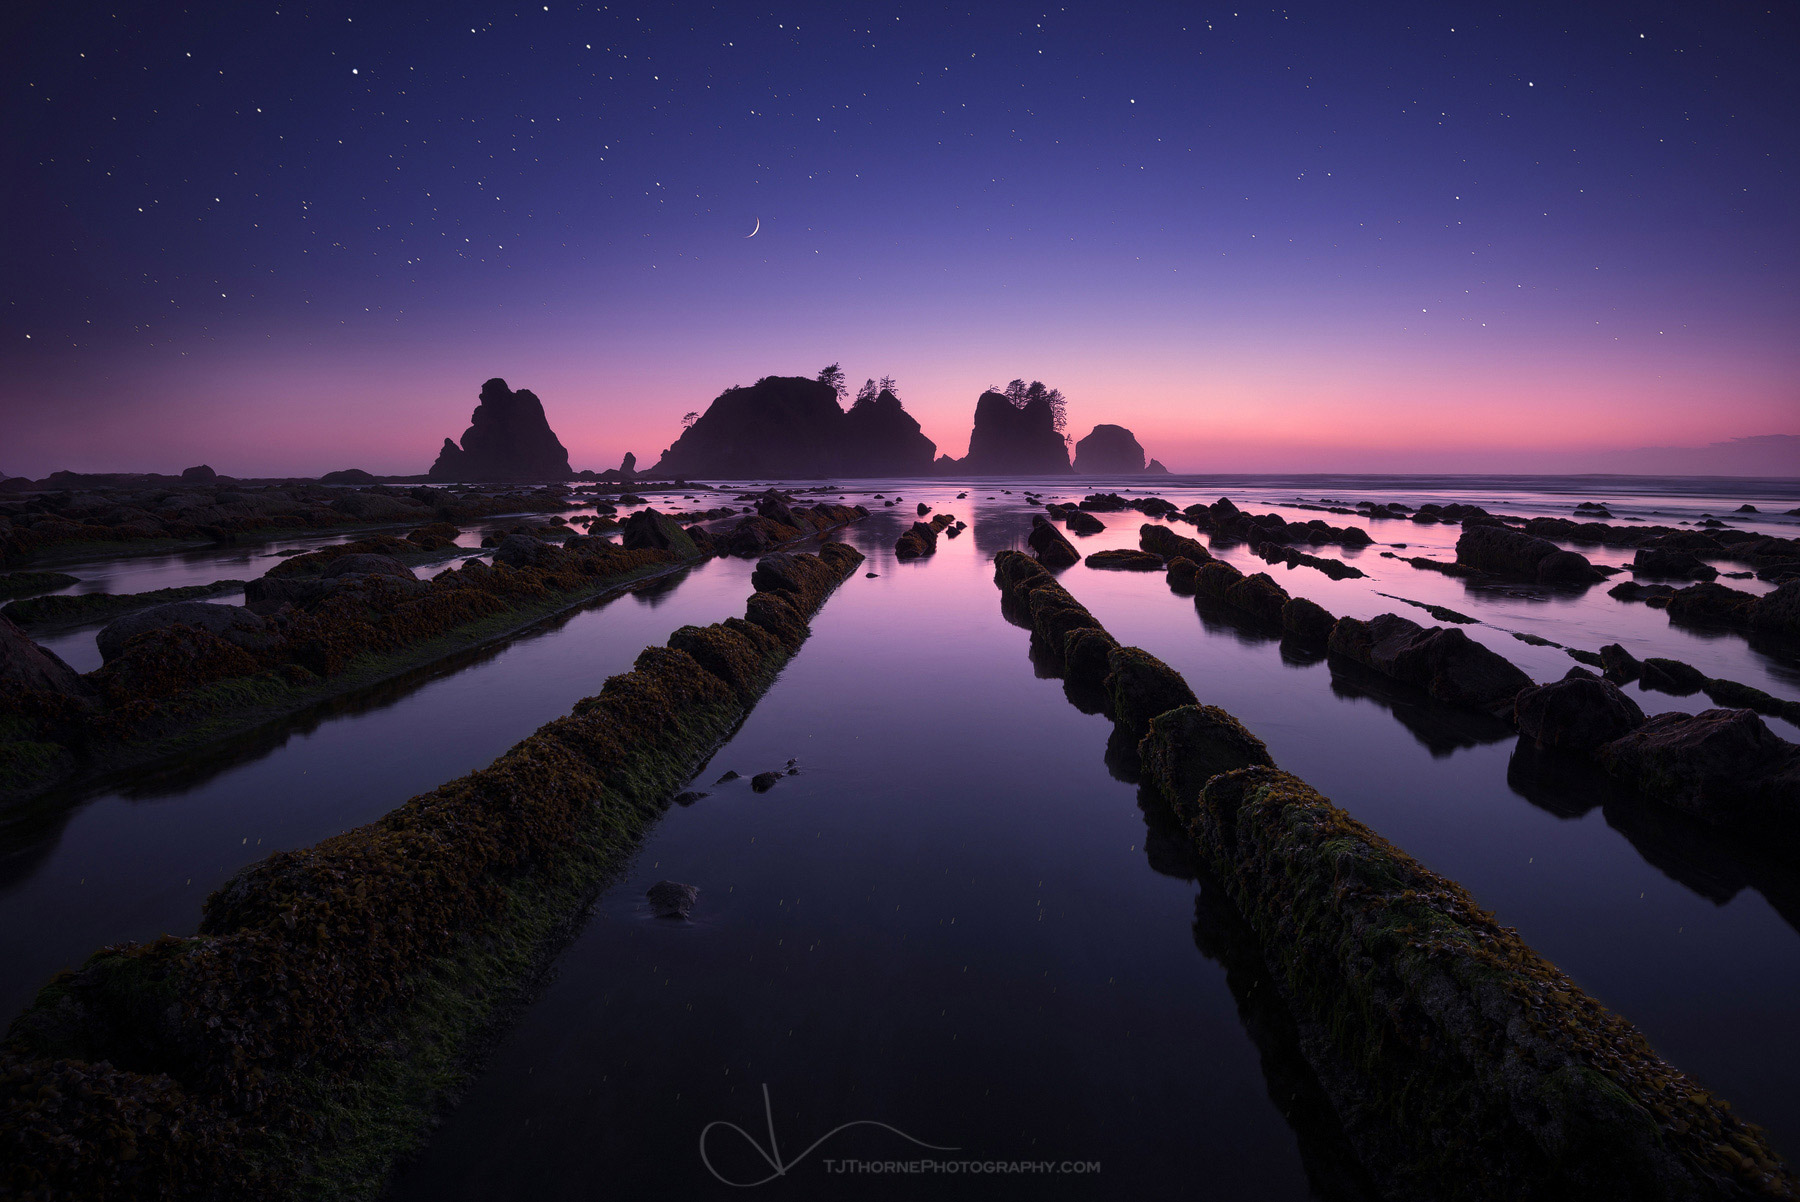 Twilight at a remote beach in Olympic National Park, Washington. This was taken back in May 2016 on a trip to Olympic National...